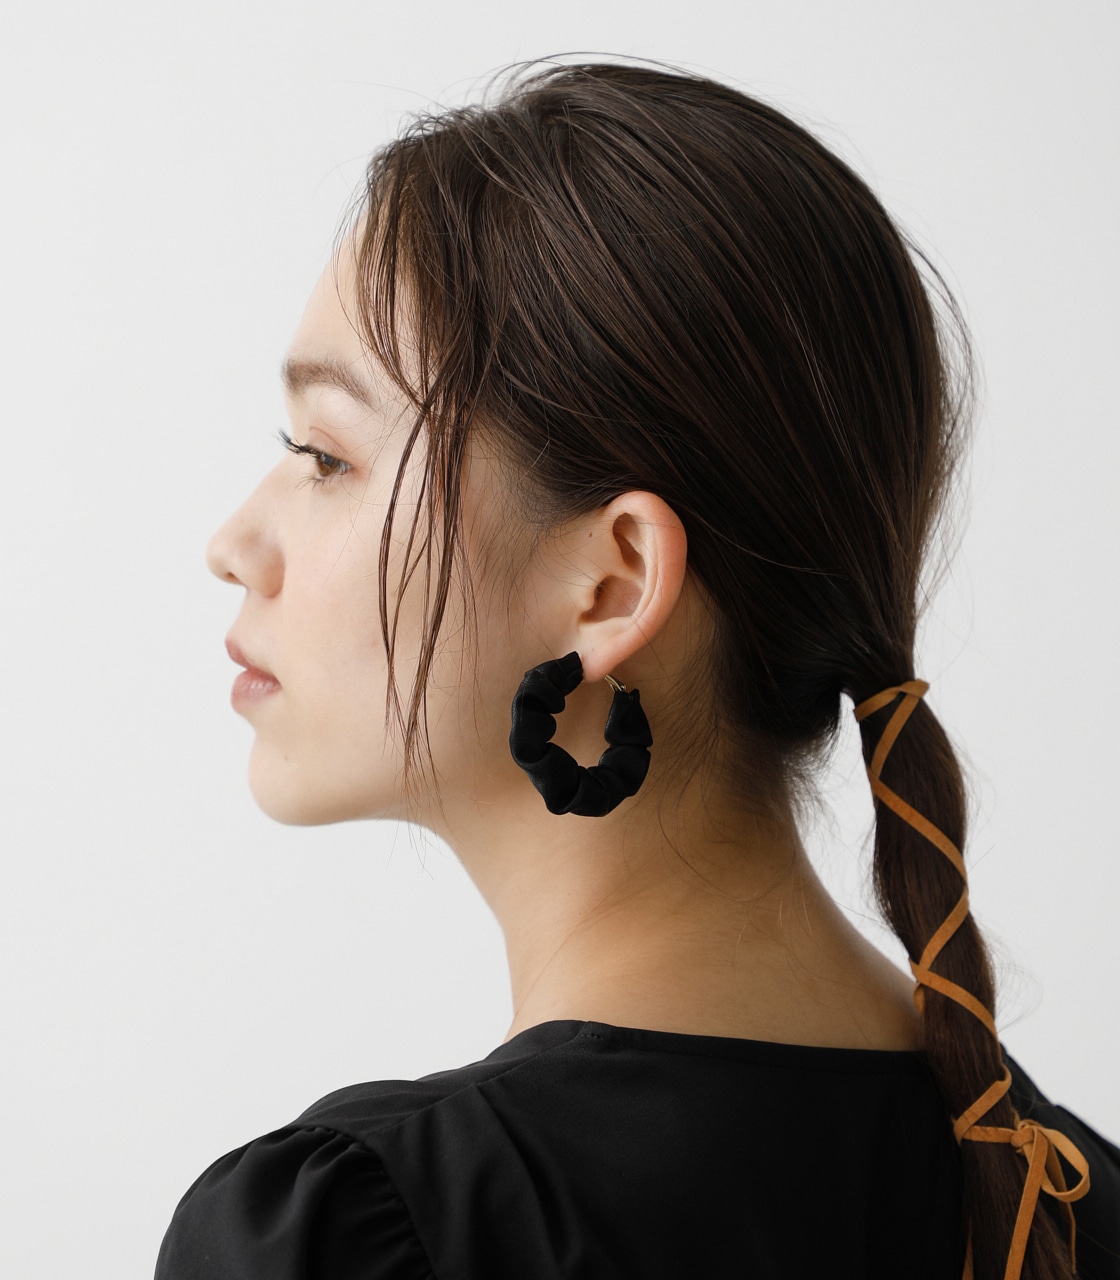 FAUX LEATHER GATHER EARRINGS/フェイクレザーギャザーピアス 詳細画像 BLK 7